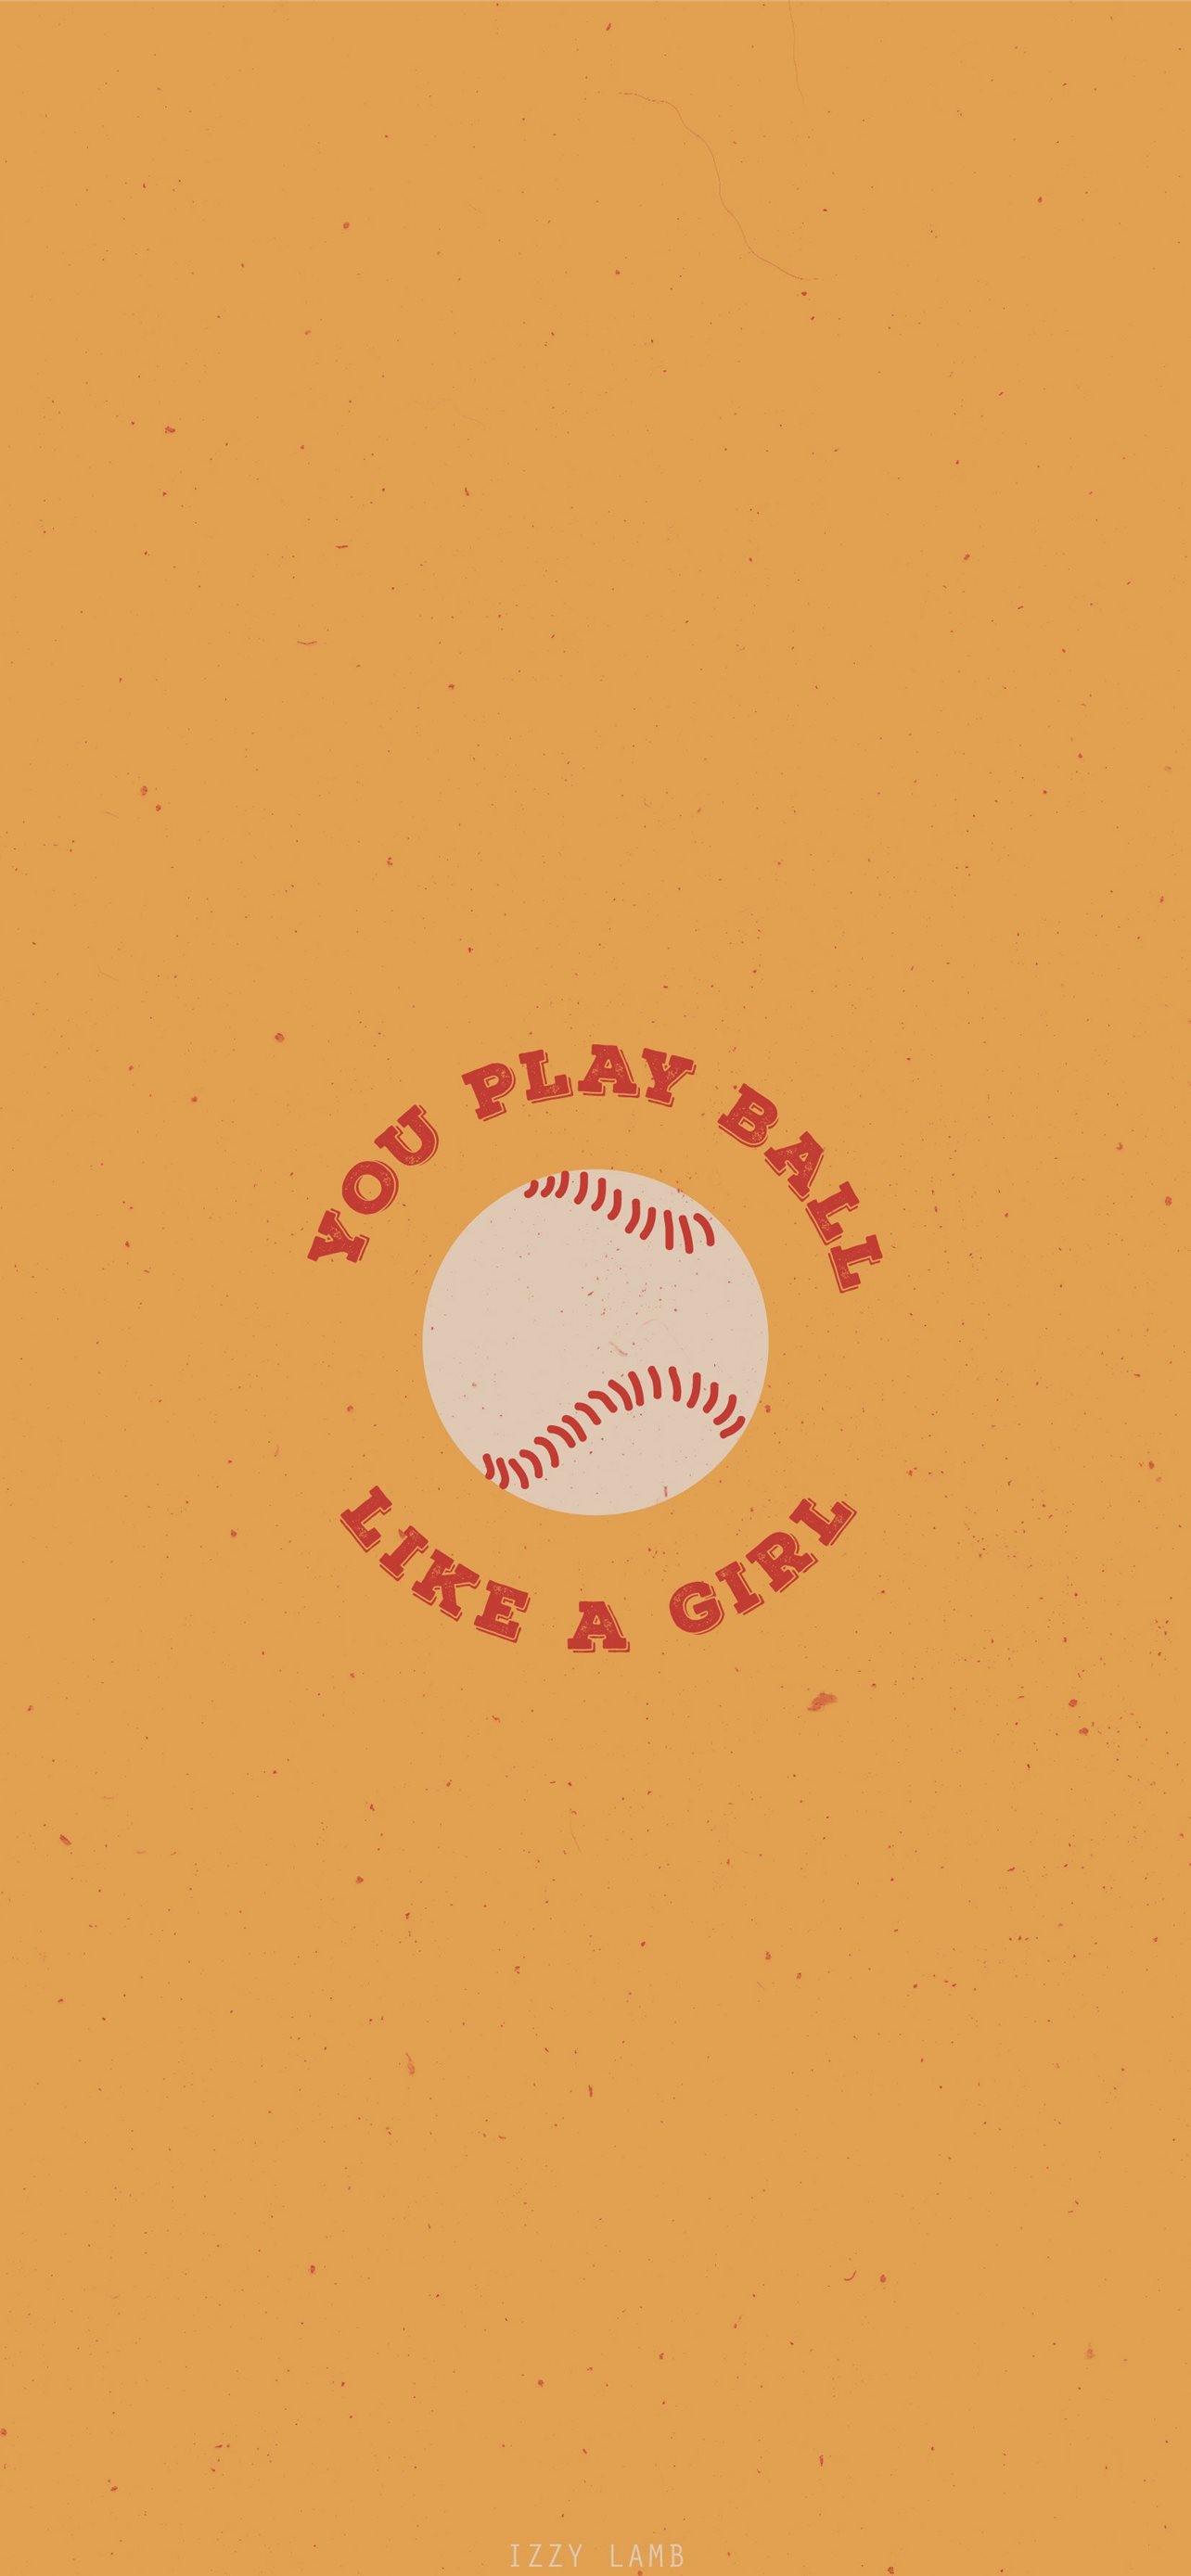 softball backgrounds for iphone